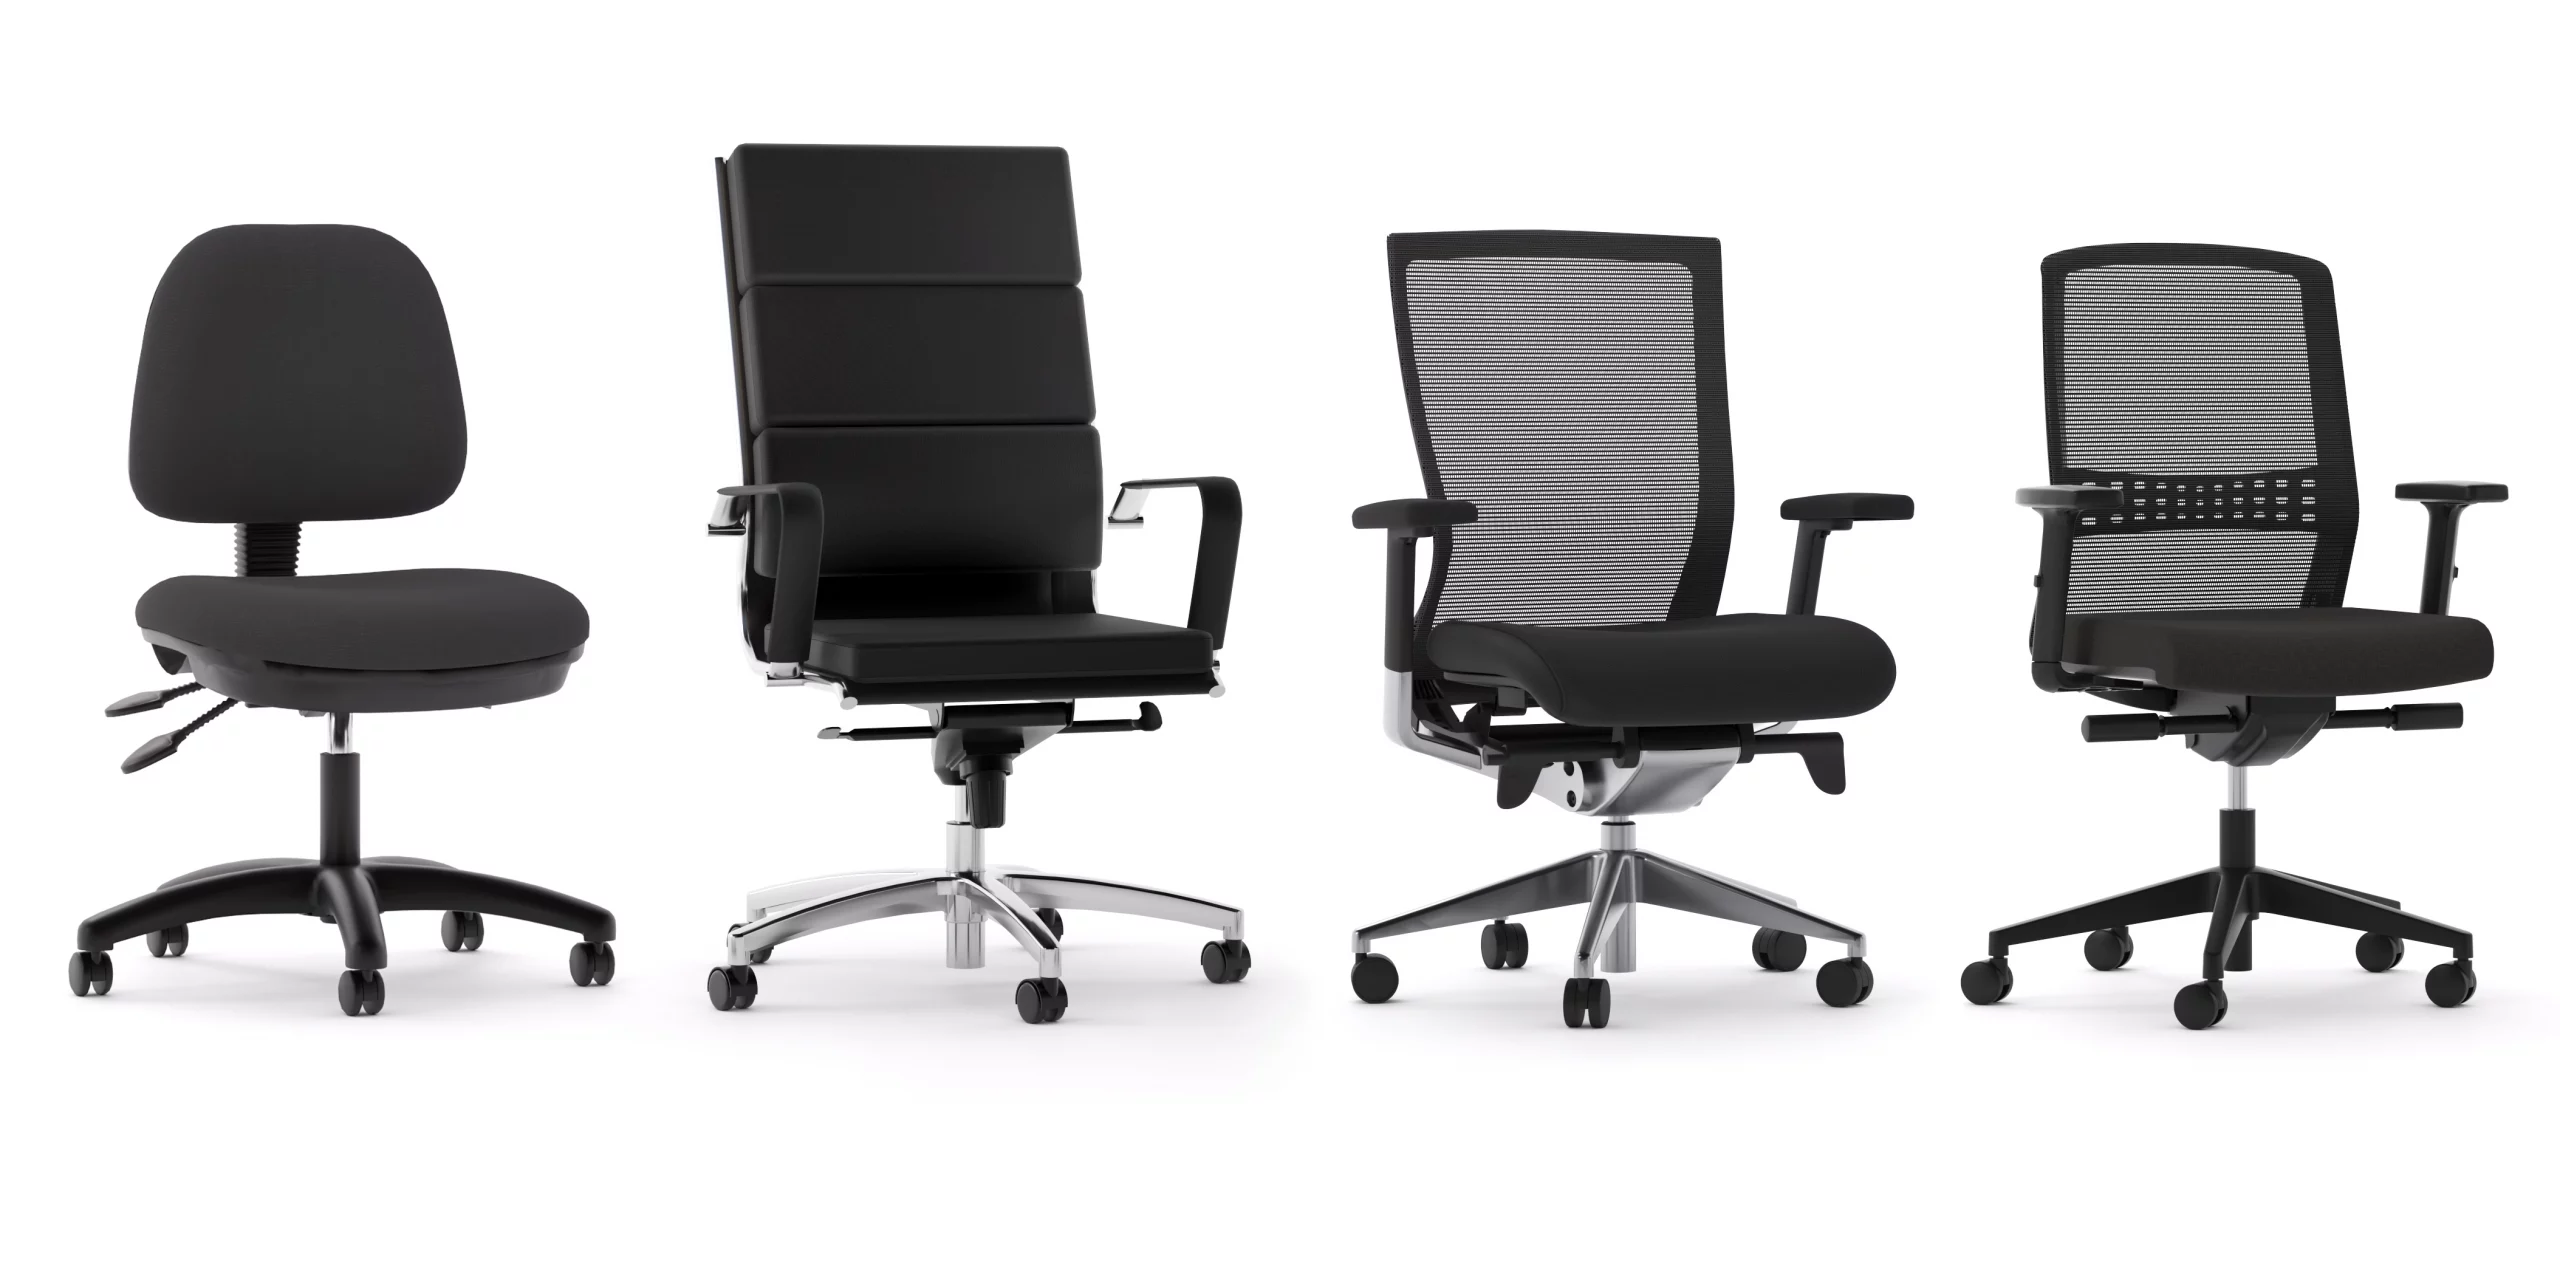 What are the Different Types of Office Chair?